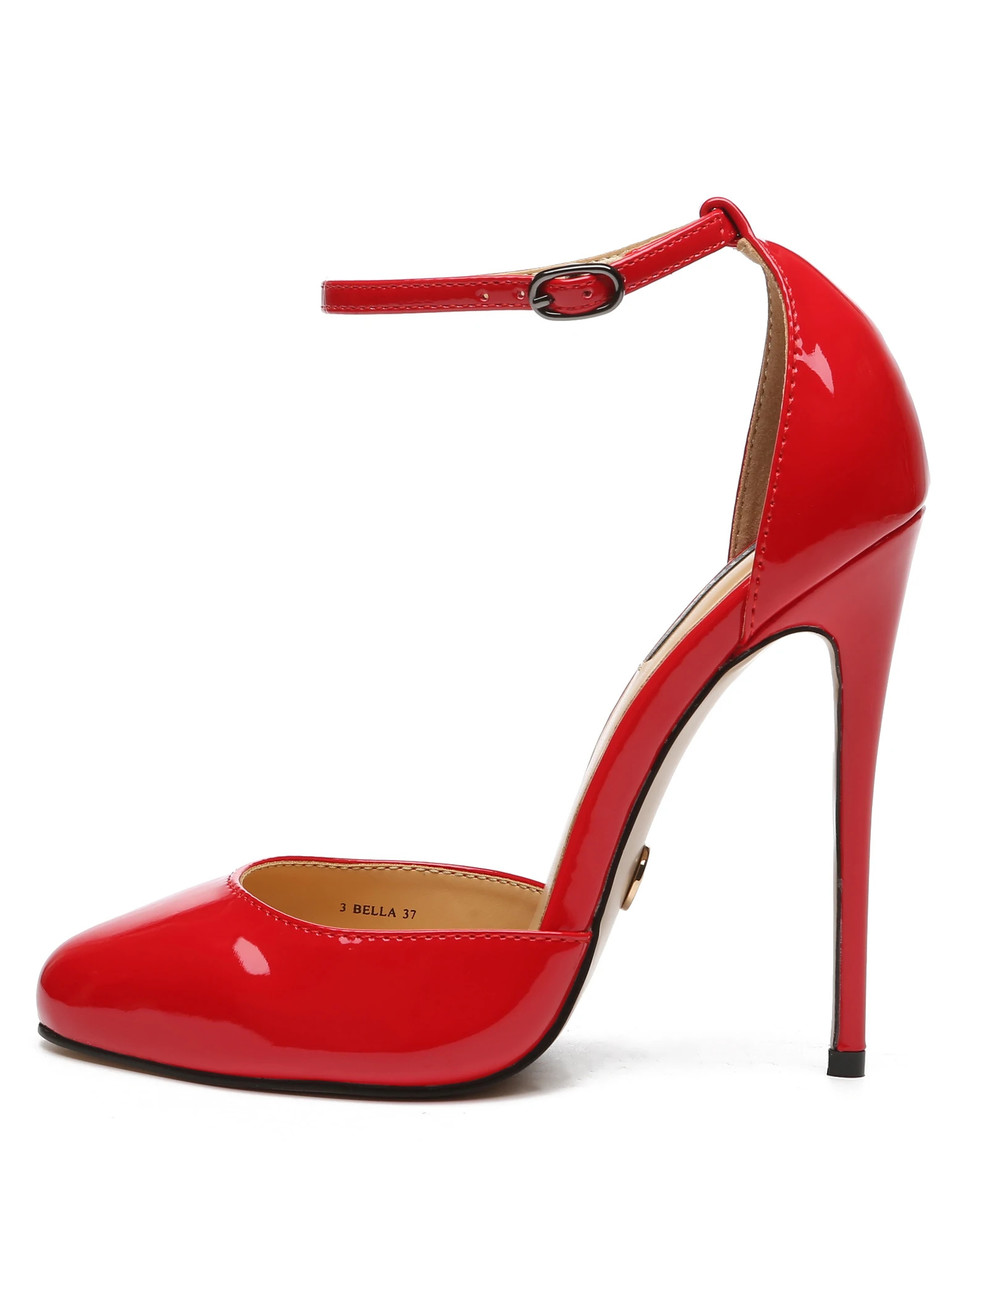 red high heel shoes with ankle strap